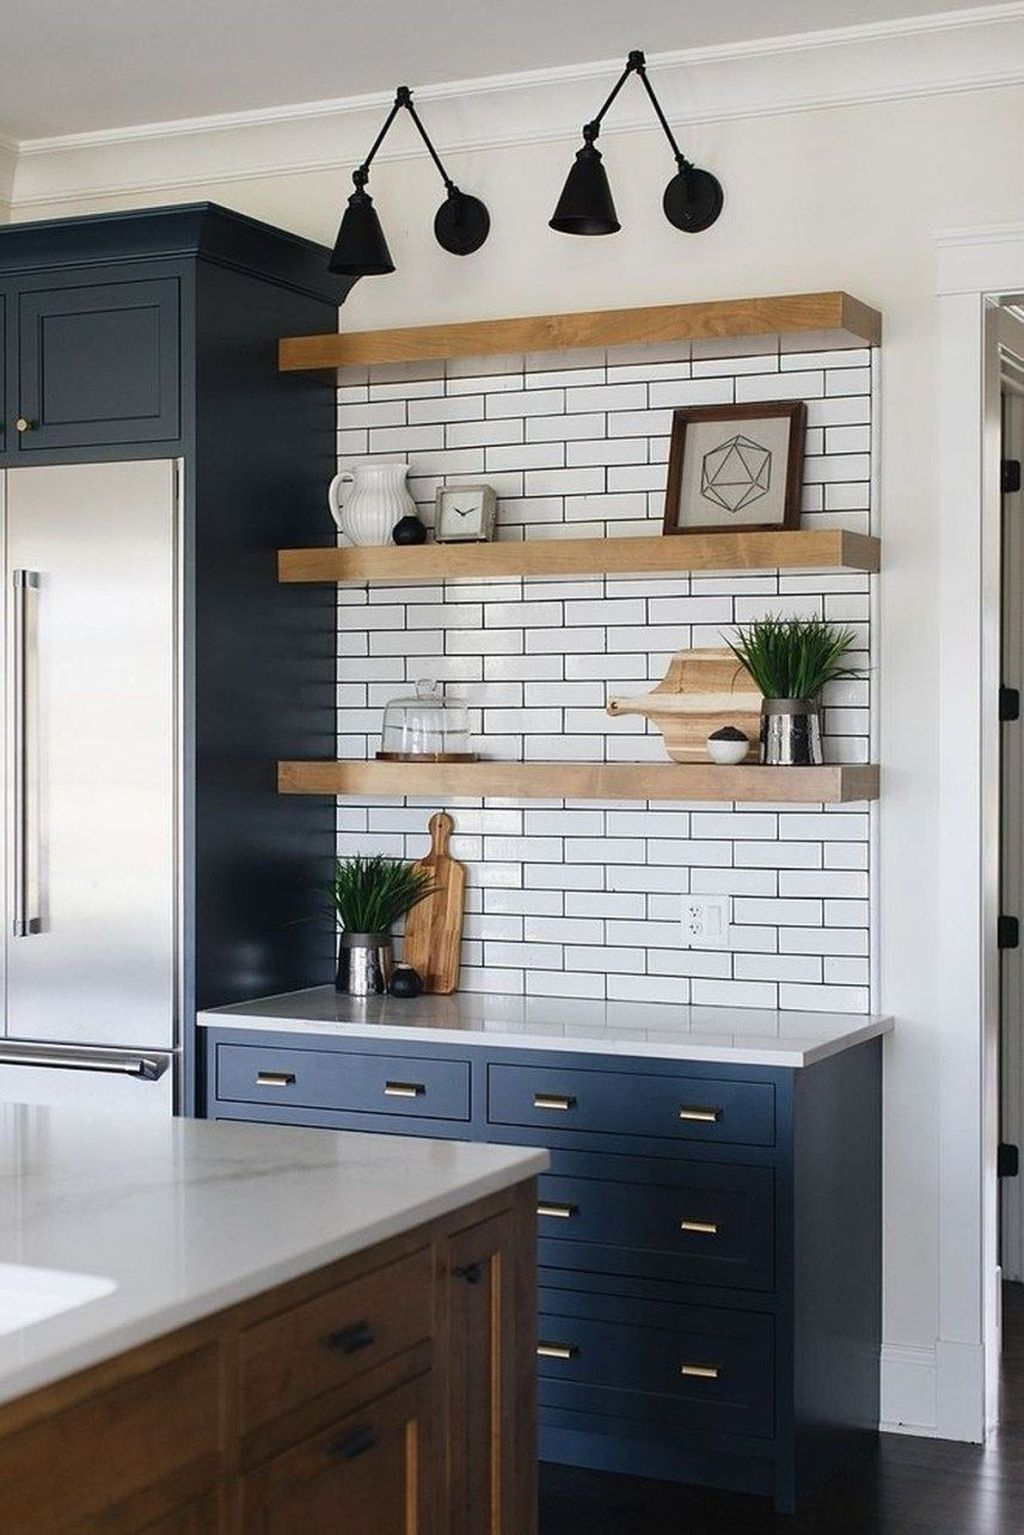 Cool Diy Kitchen Design Ideas You Will Definitely Want To Keep 22